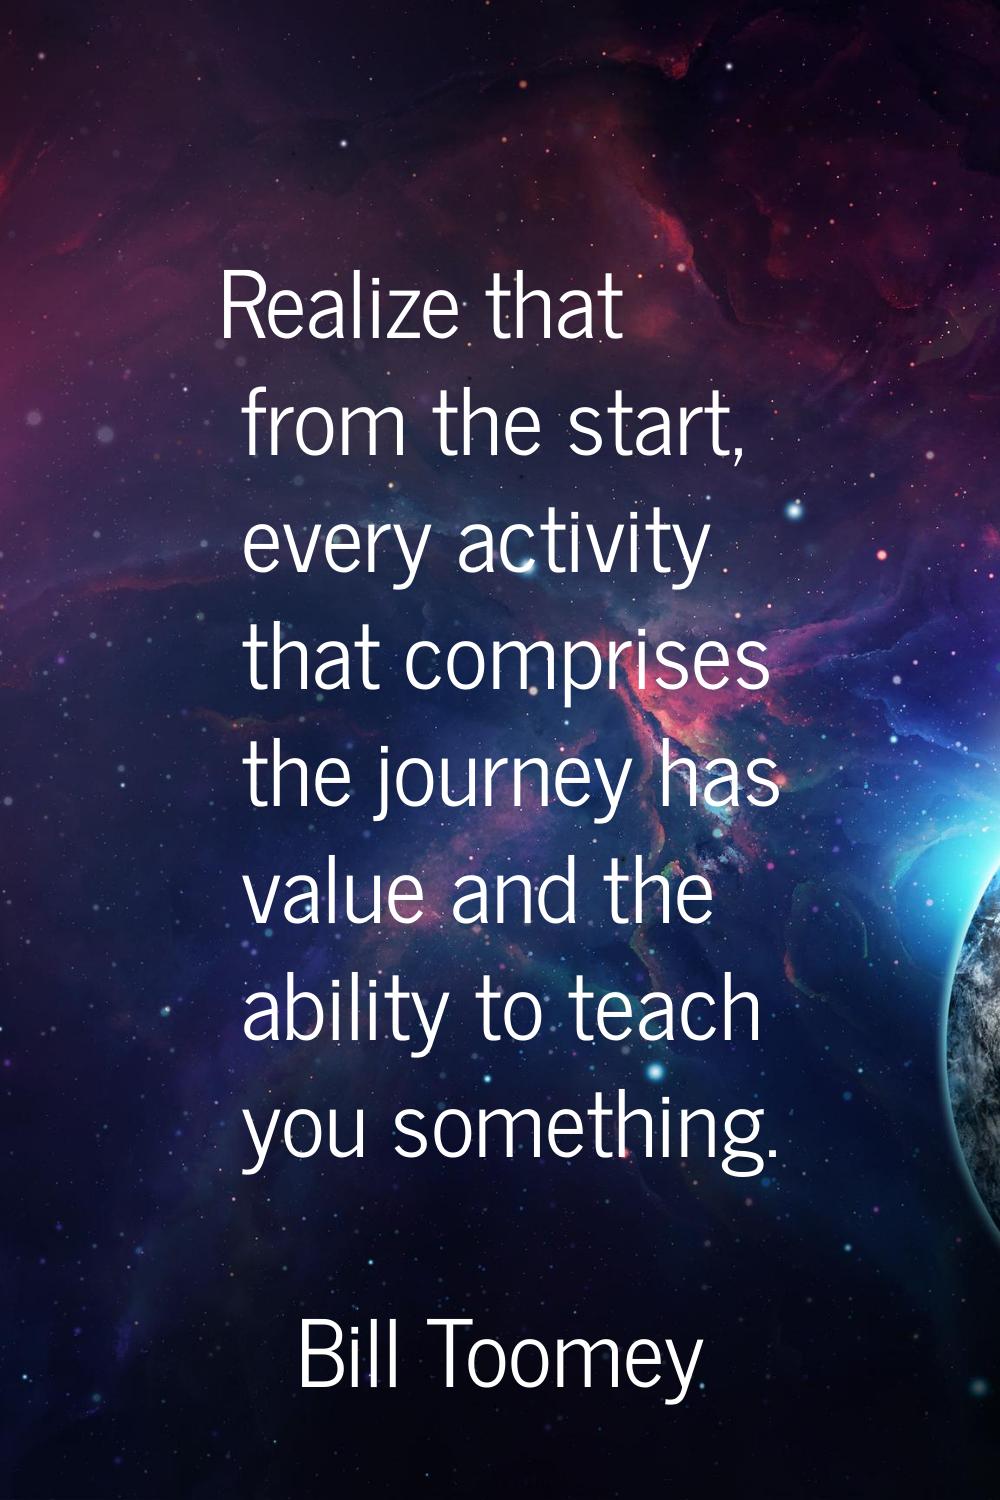 Realize that from the start, every activity that comprises the journey has value and the ability to